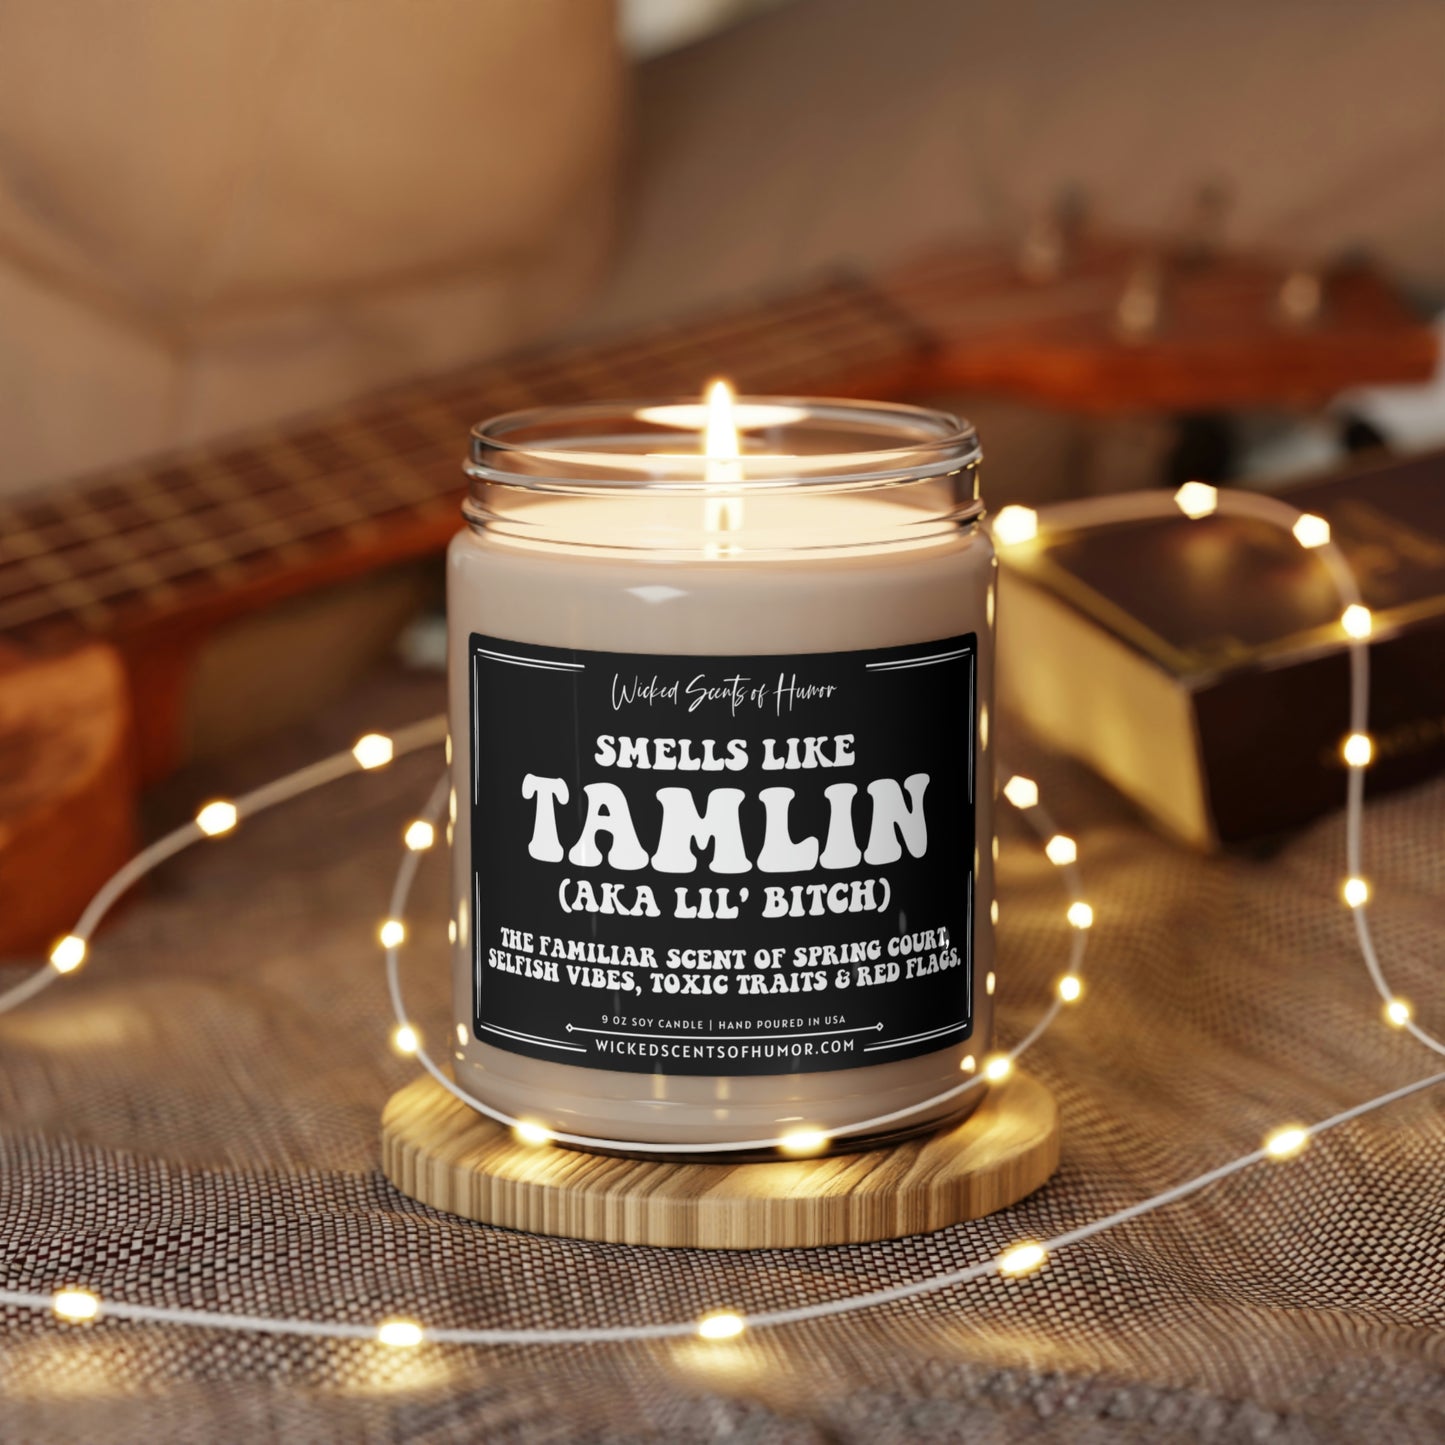 Tamlin's a Bitch, ACOTAR Spring Court Velaris, Bookish Gift, Reader Gift, Funny Adult Candles, All Natural 9oz Soy Candle, ACOMAF Merch